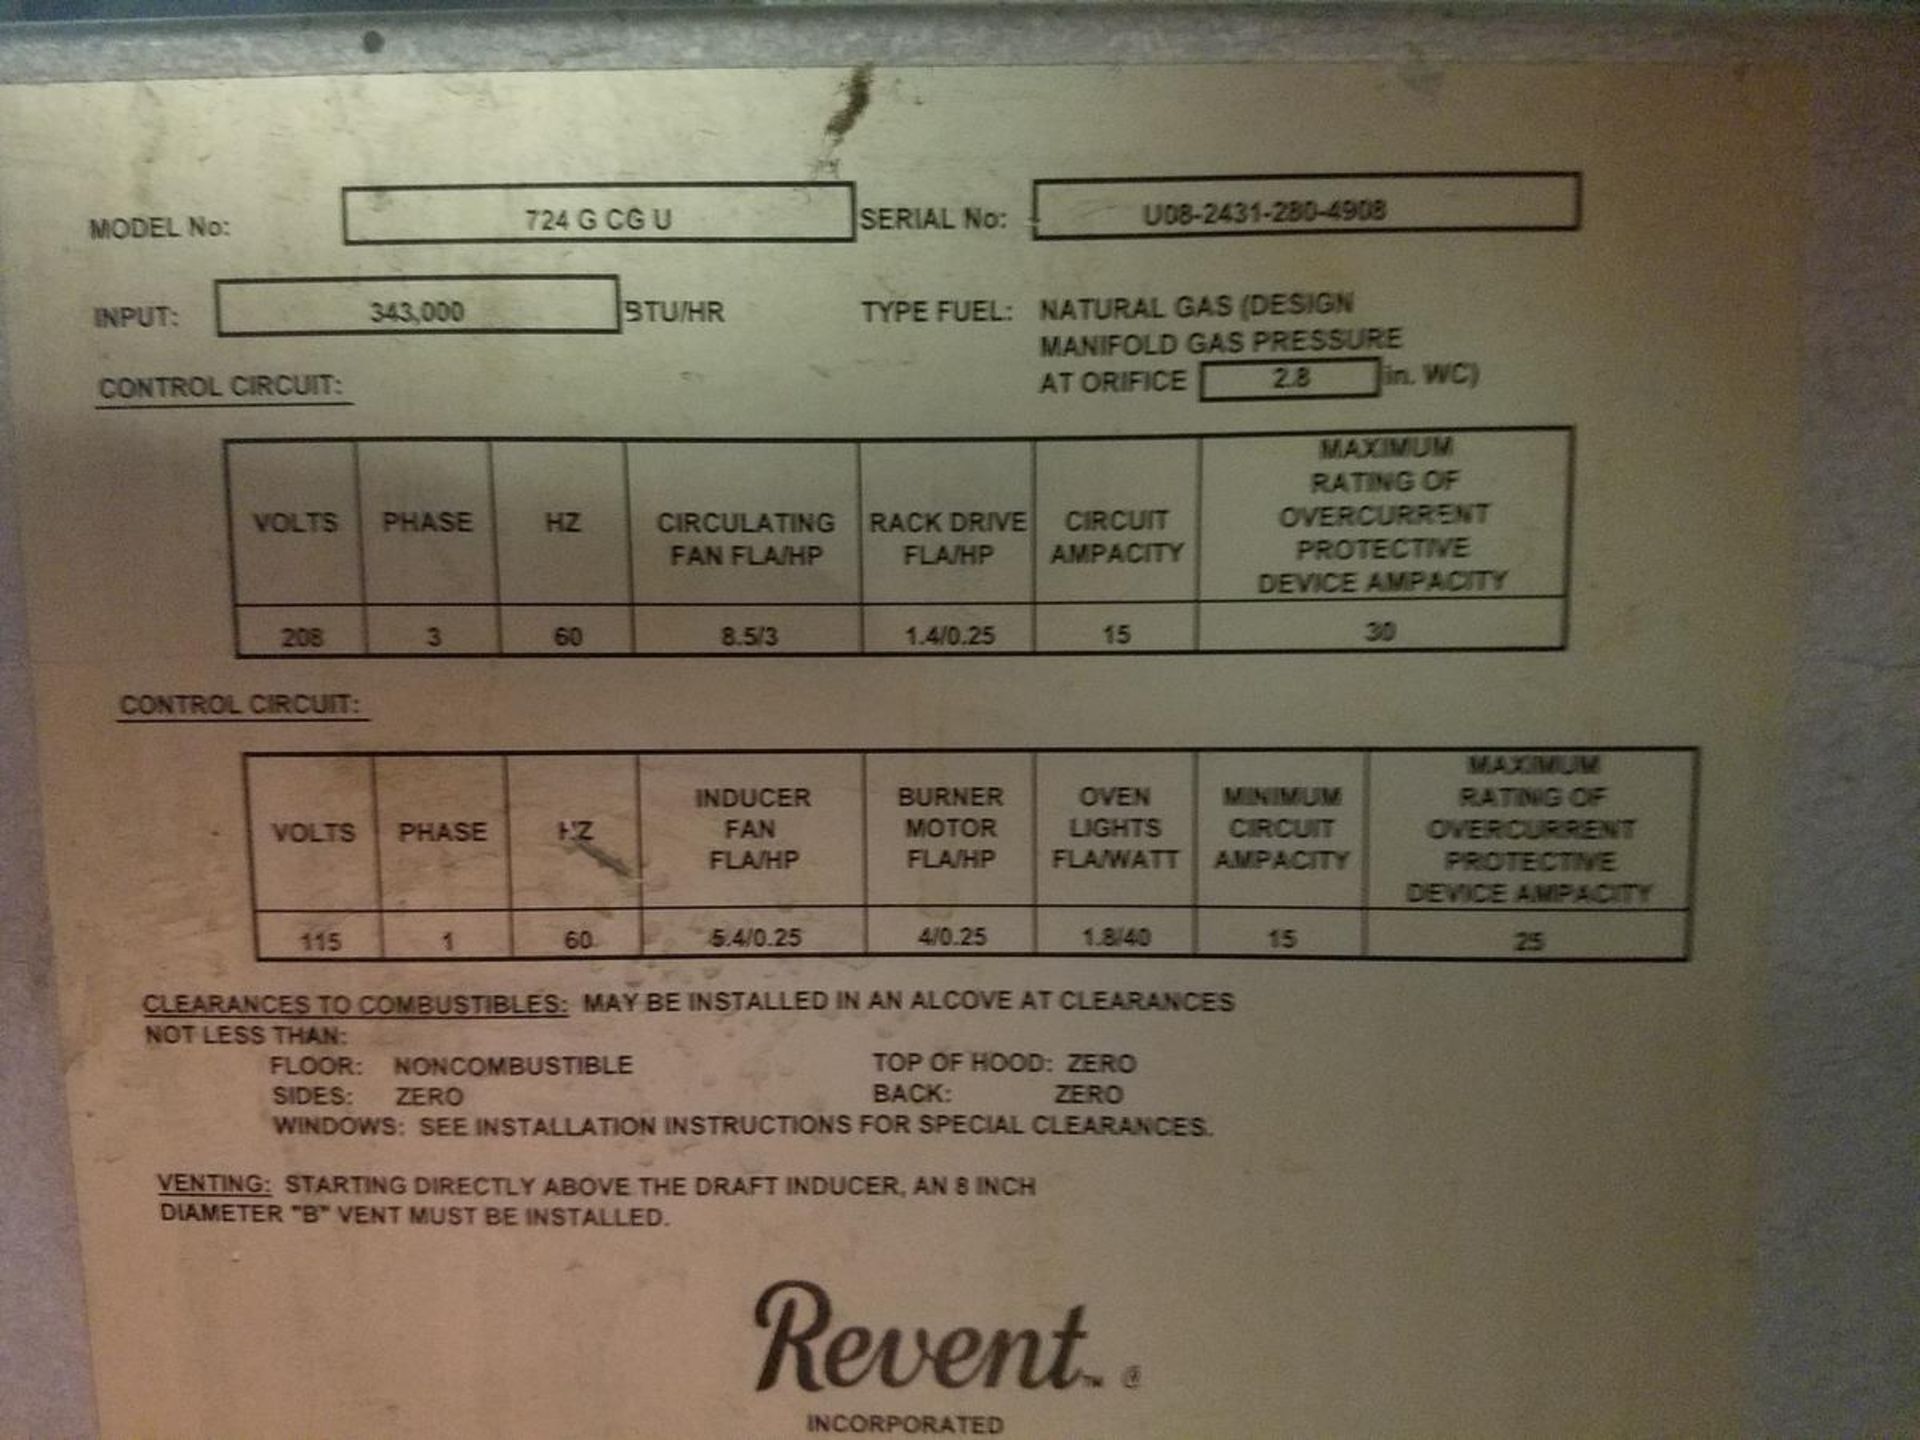 Revent Double Rack Oven, M# 724 G CG U, S/N U08-2431-280-4908, Natural Gas, 343,000 | Rig Fee: $1250 - Image 2 of 4